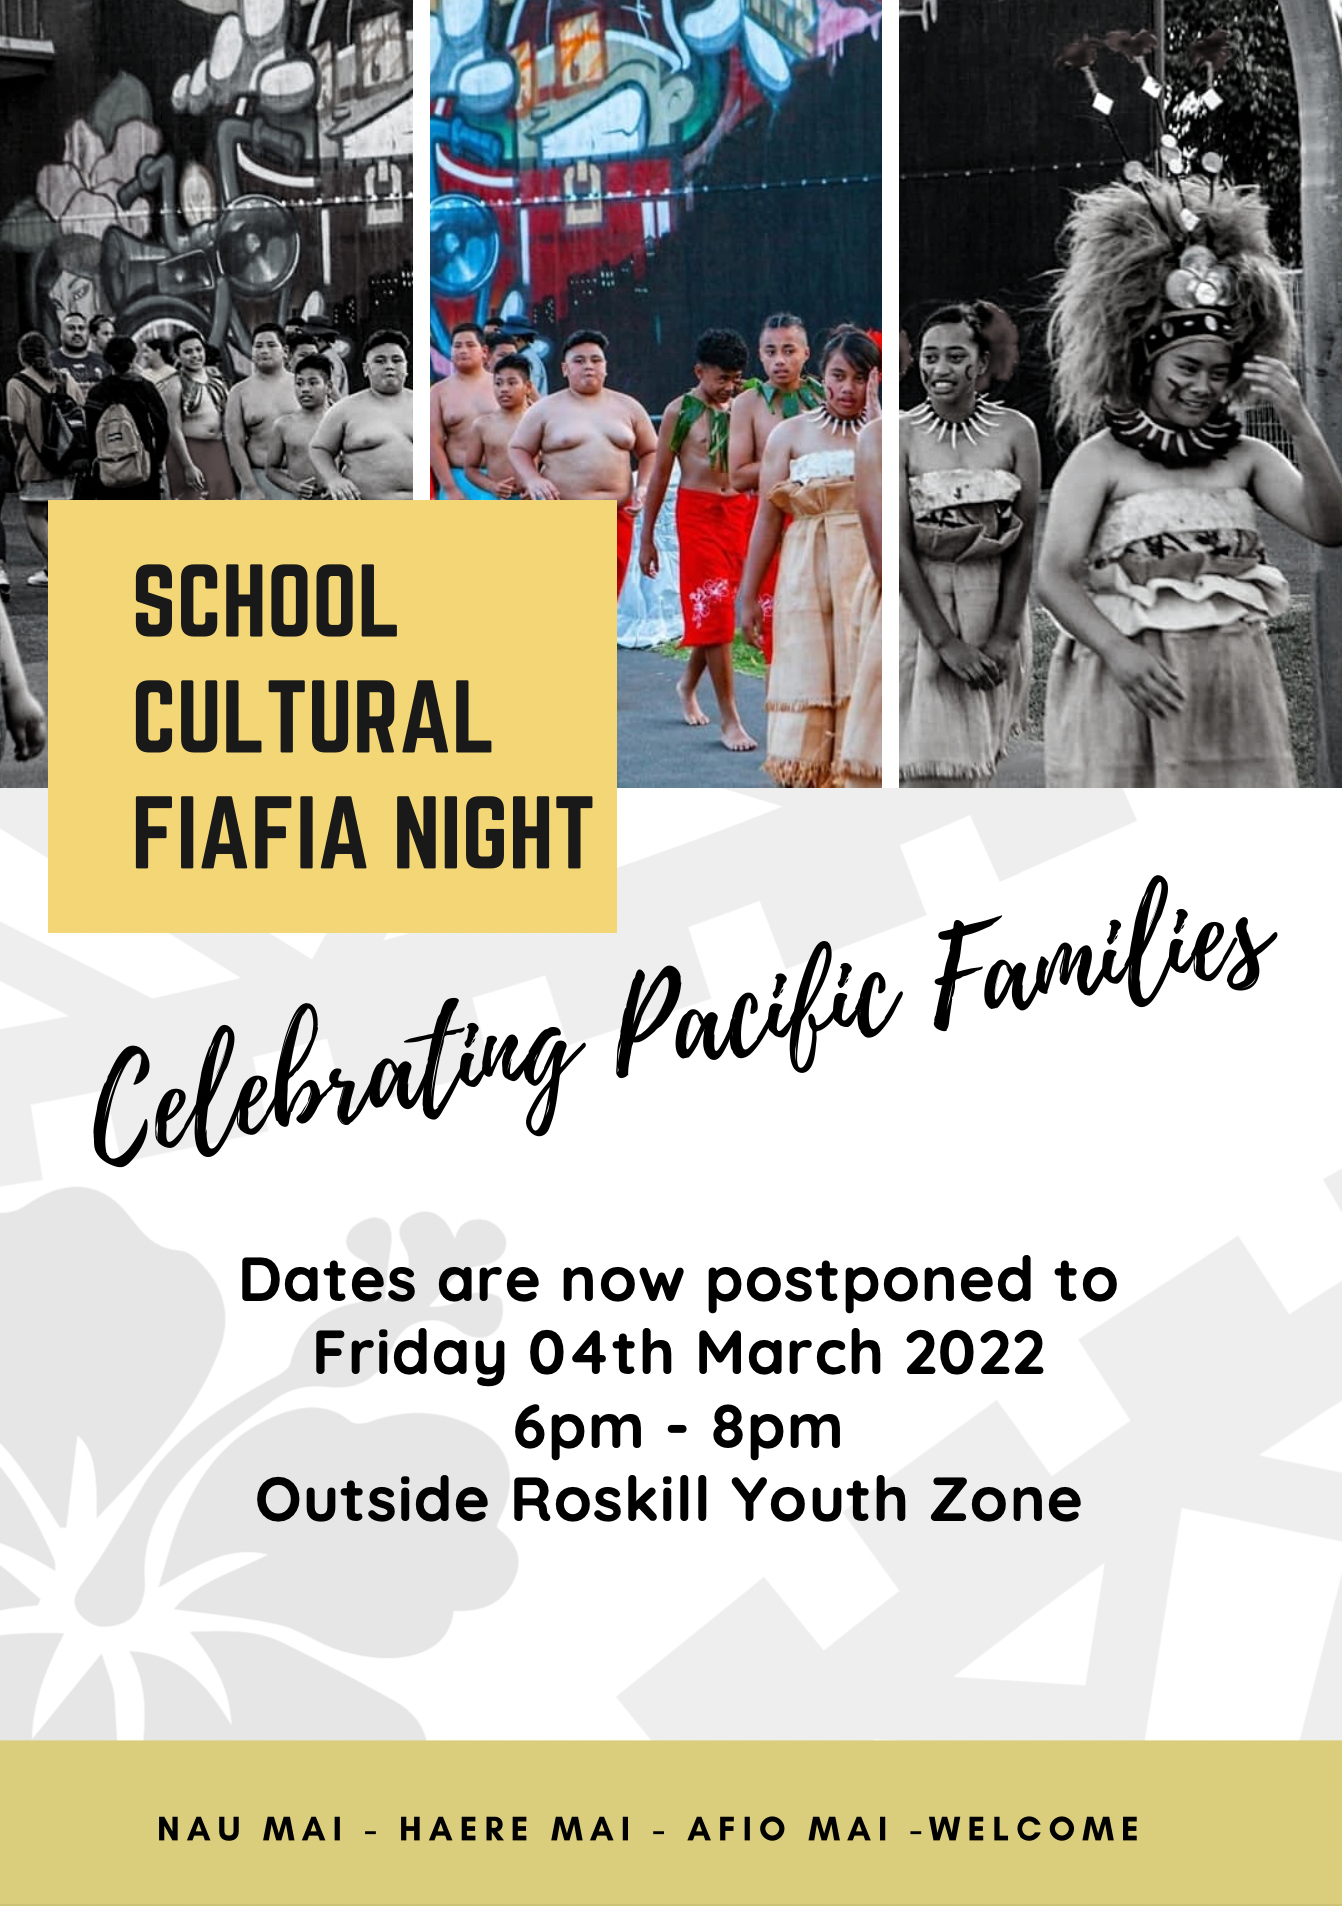 Celebrating Pacific Families Event Poster